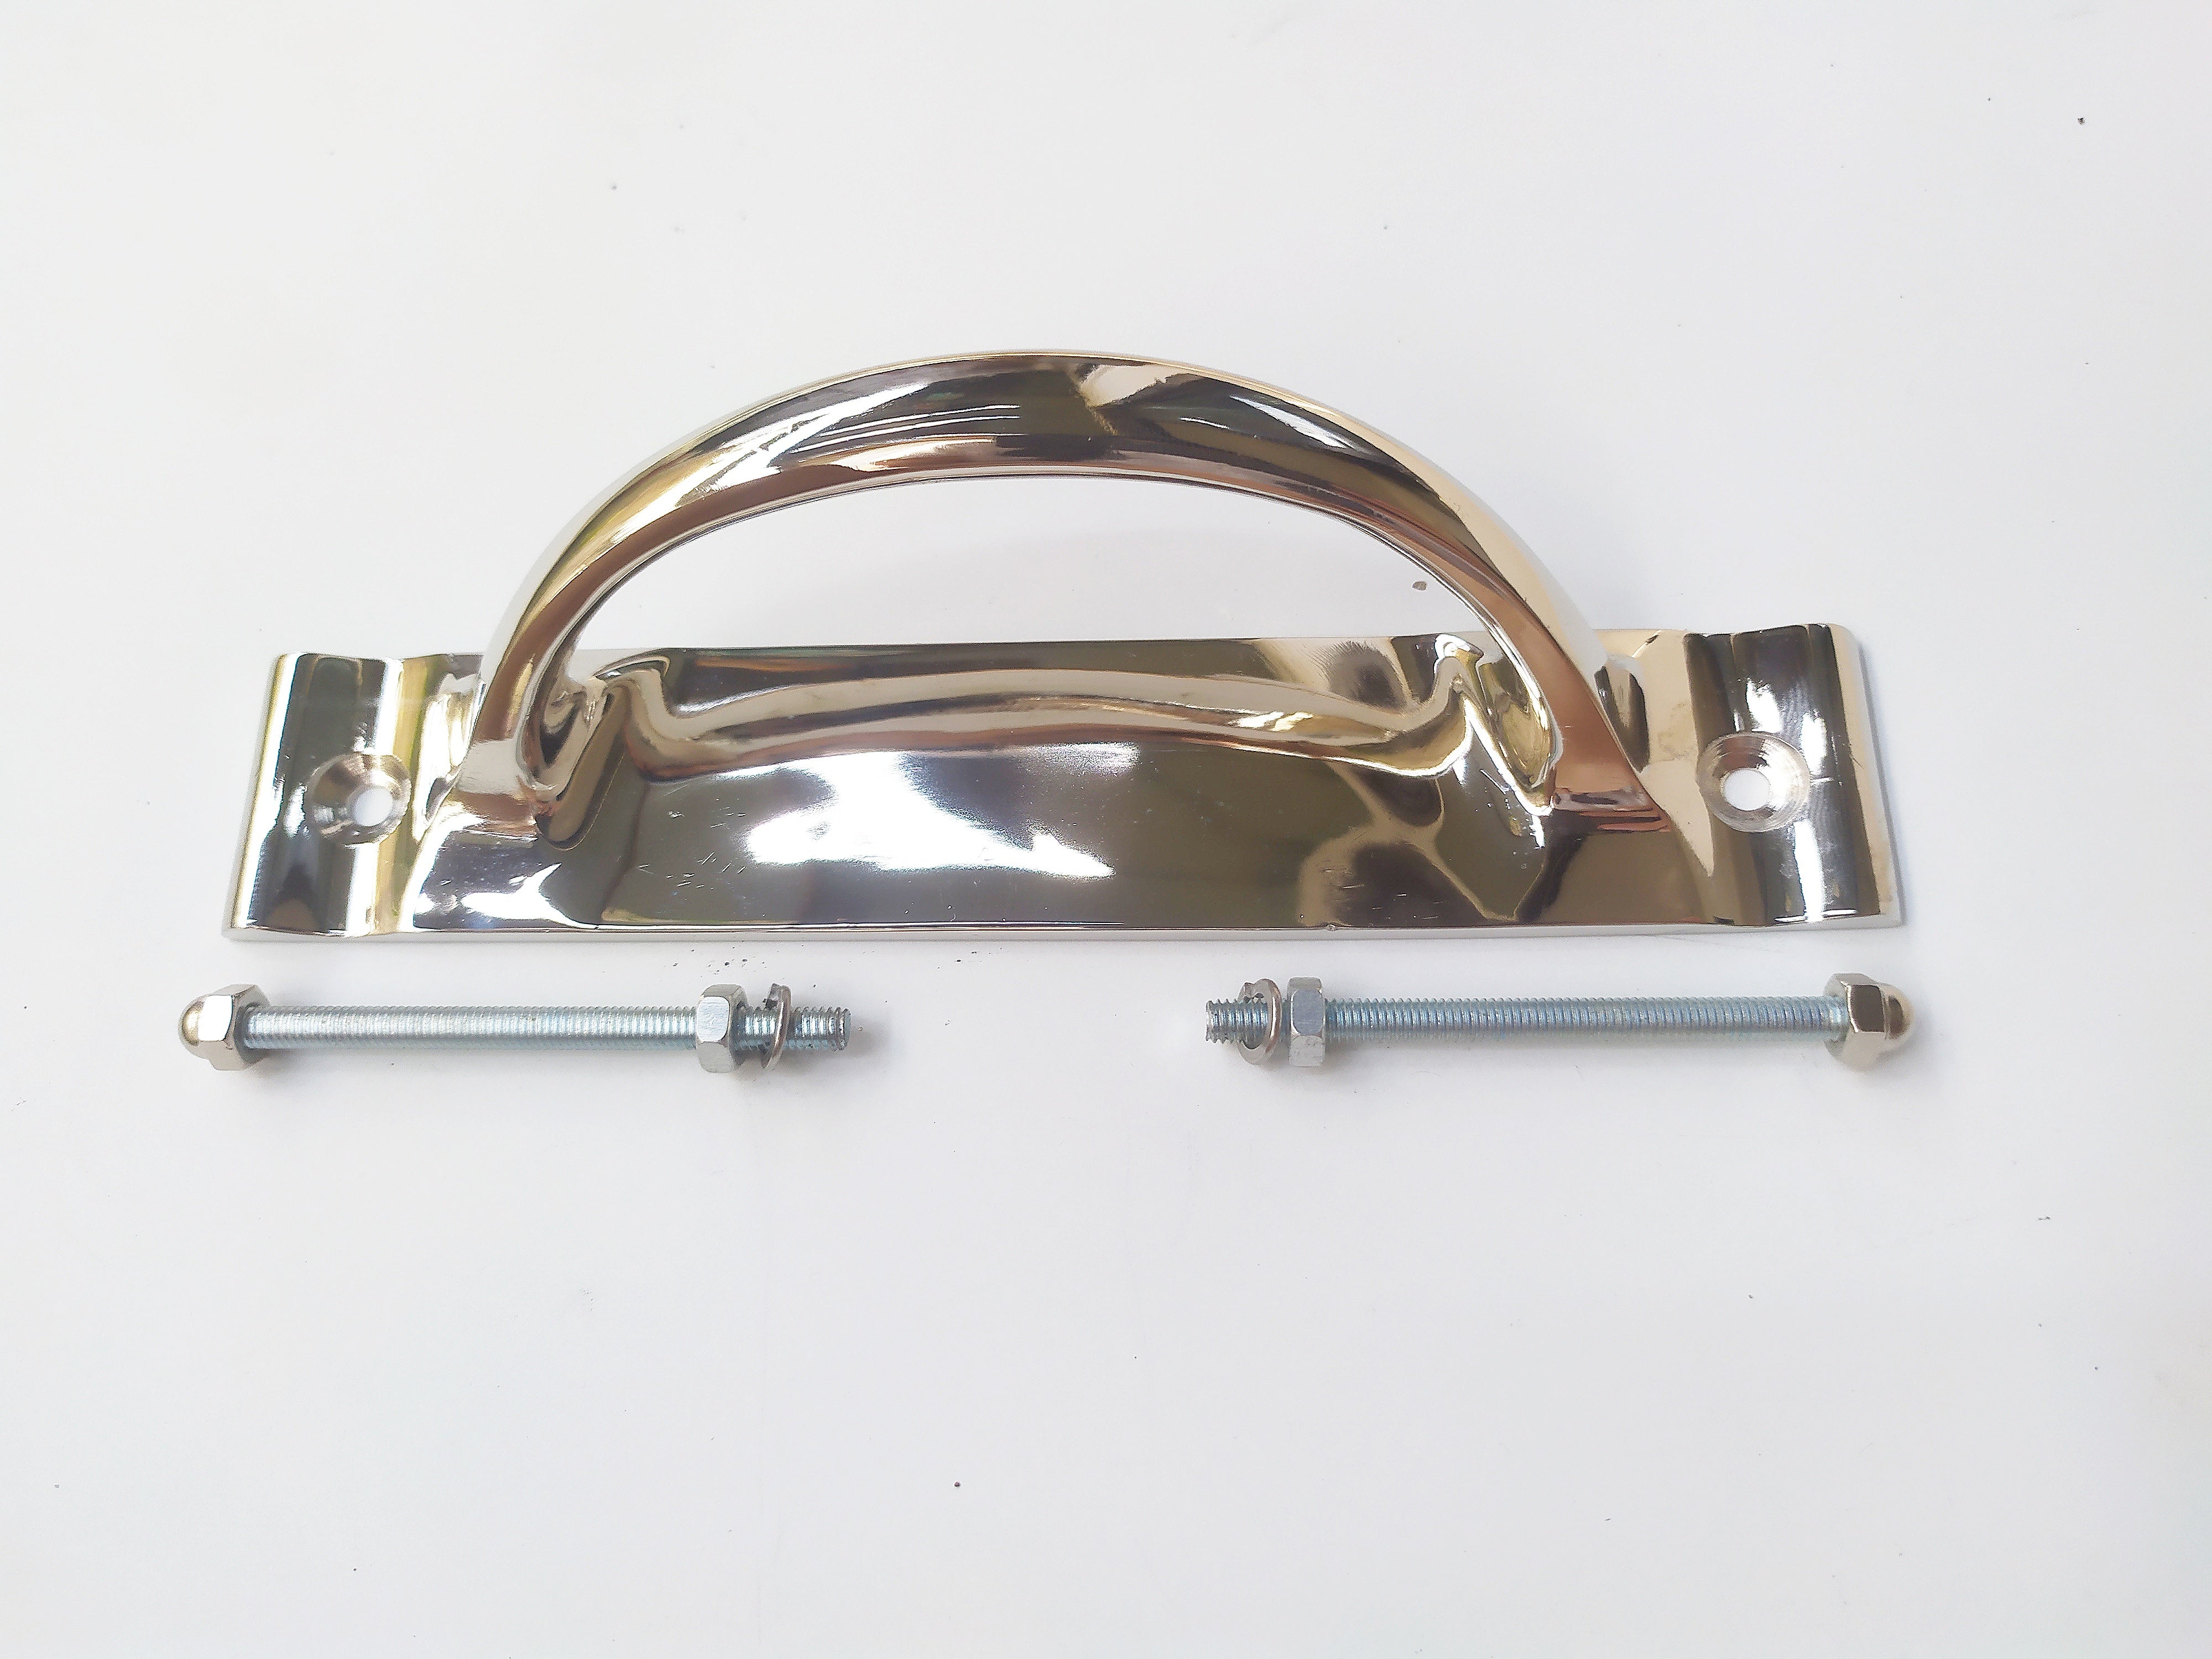 Solid brass Handle on a backplate in nickel plating